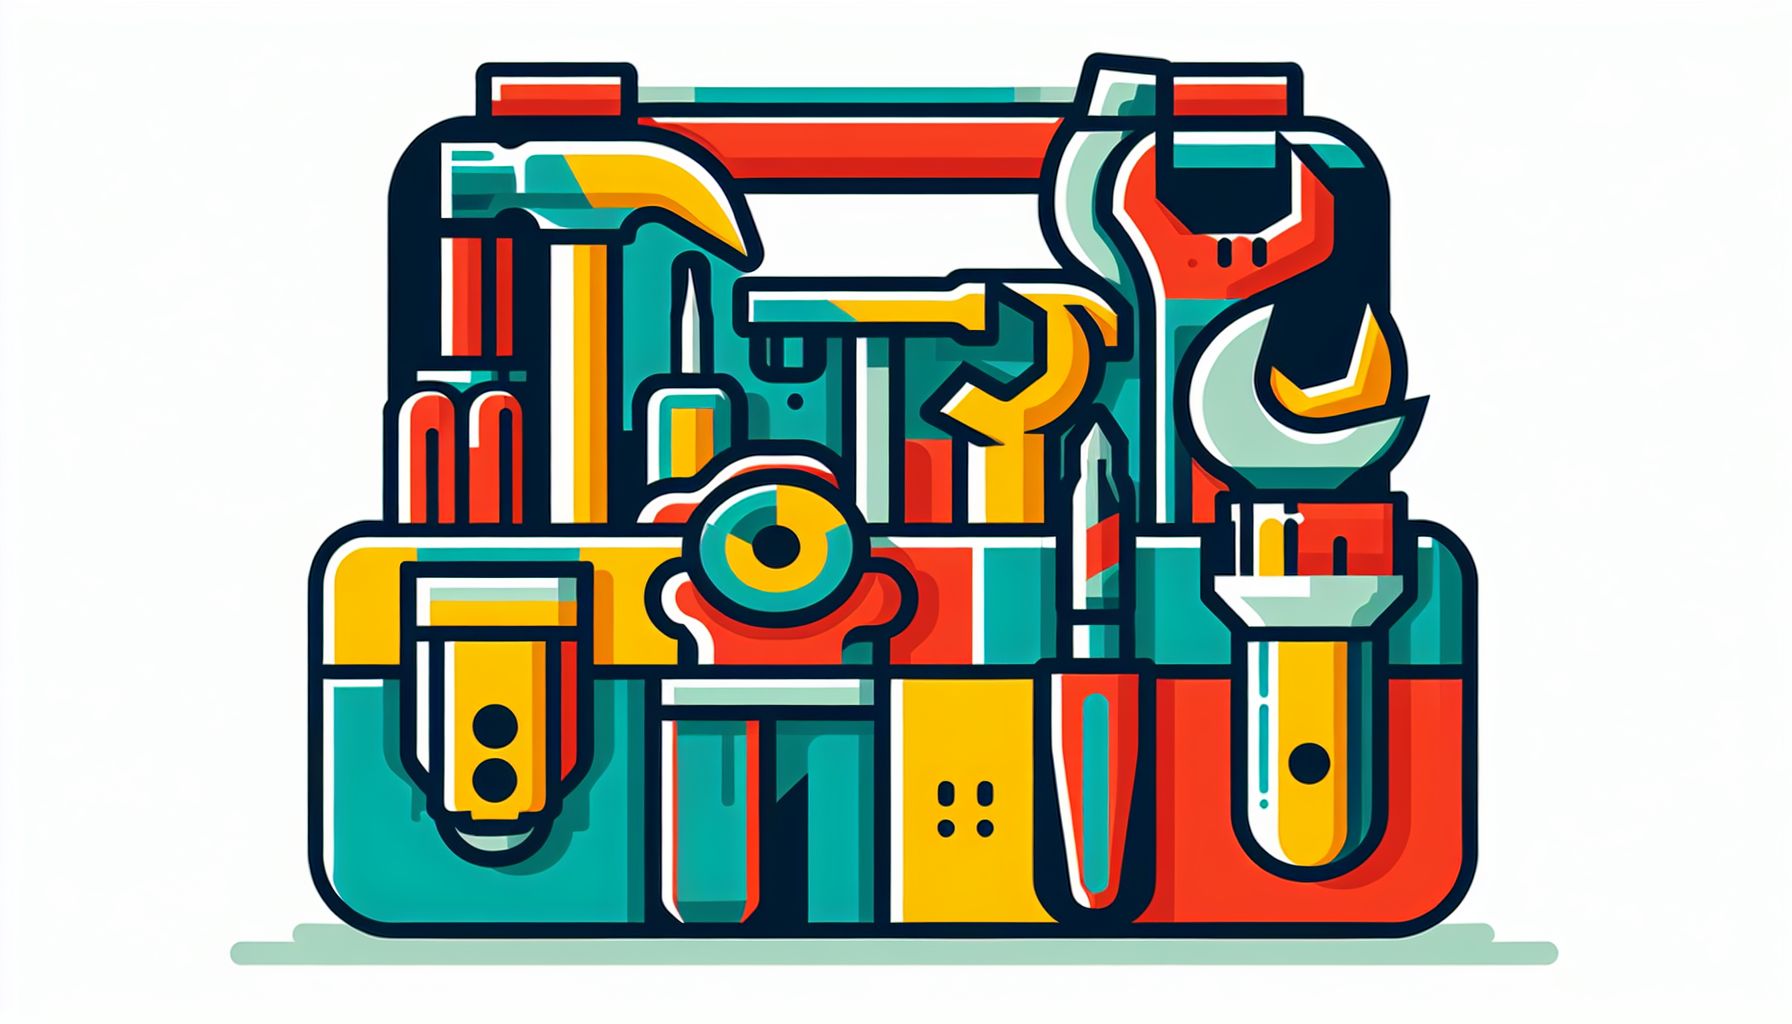 Toolbox in flat illustration style and white background, red #f47574, green #88c7a8, yellow #fcc44b, and blue #645bc8 colors.